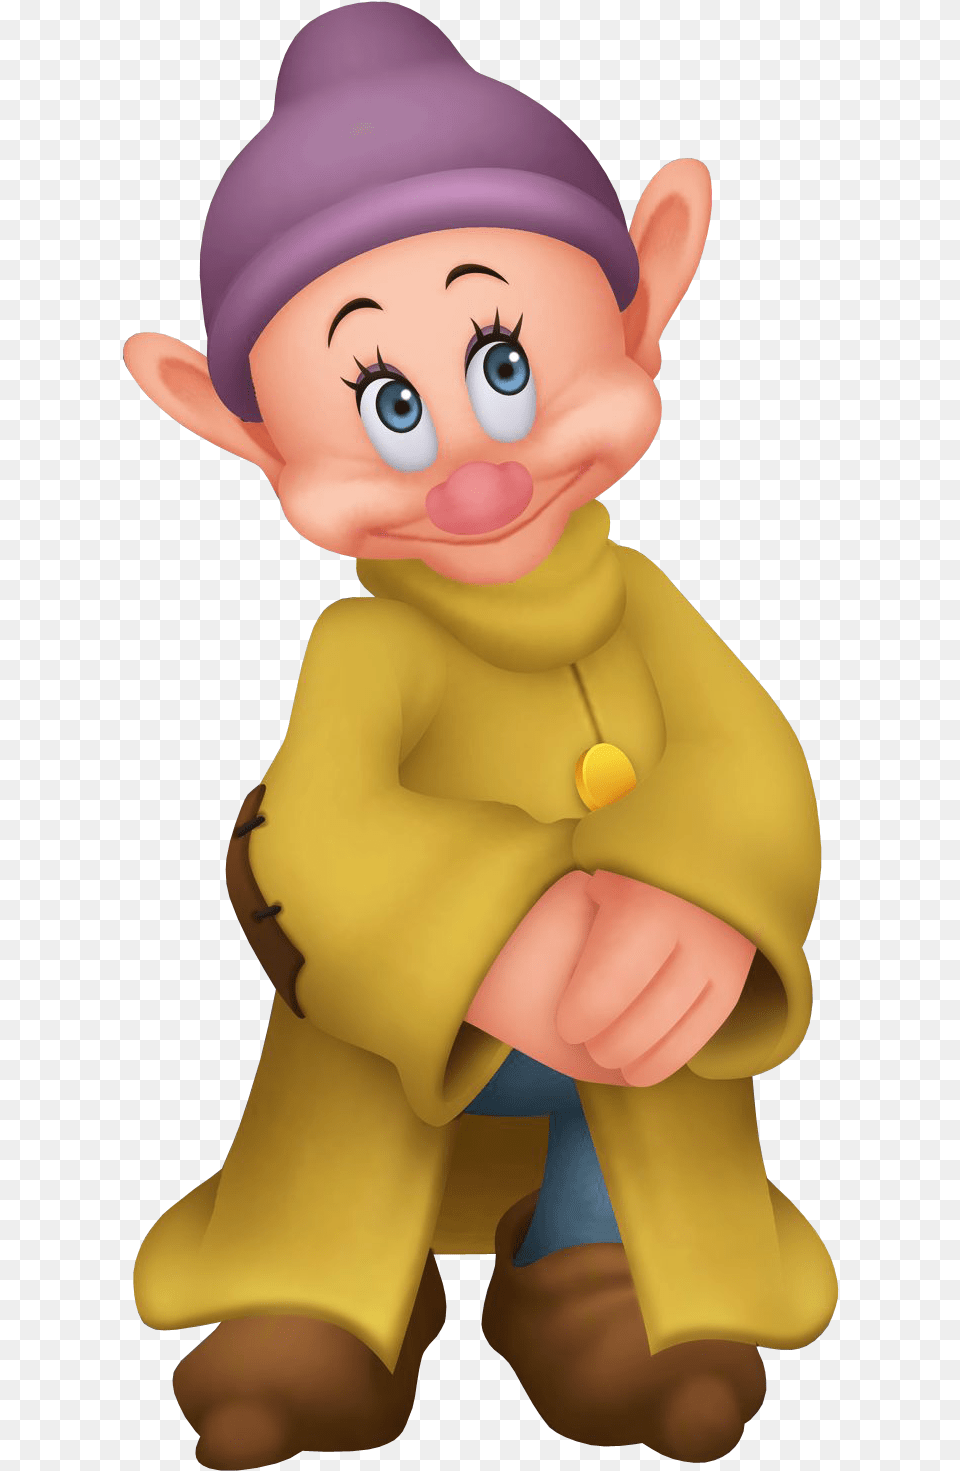 Snow White And The Seven Dwarfs Hd Seven Dwarfs, Toy, Cartoon, Face, Head Png Image